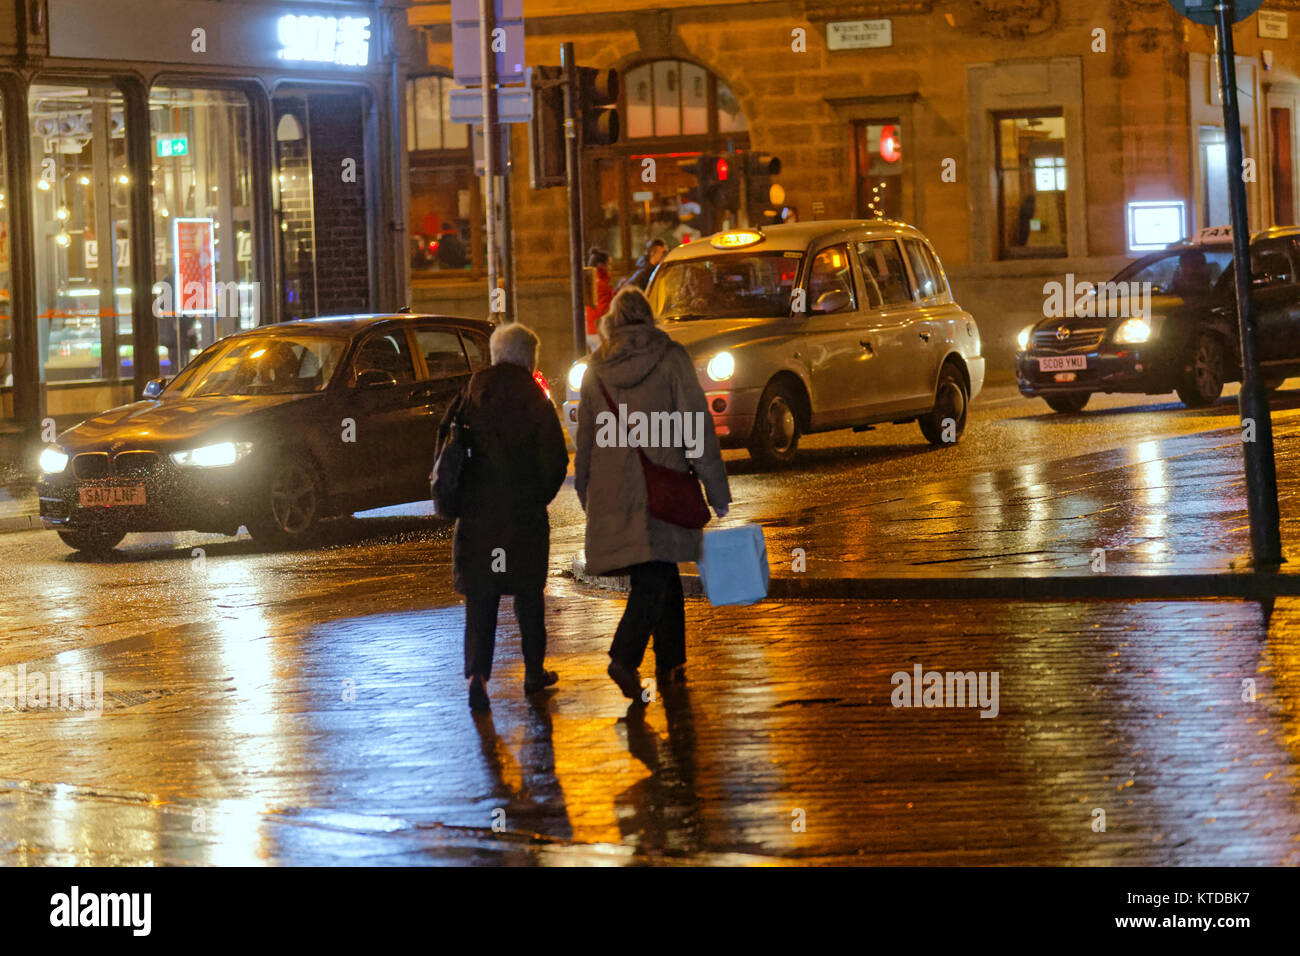 gritty urban night time Glasgow wet street life women mother and daughter returning home walking on street bags  taxi a shopping trip late at night Stock Photo